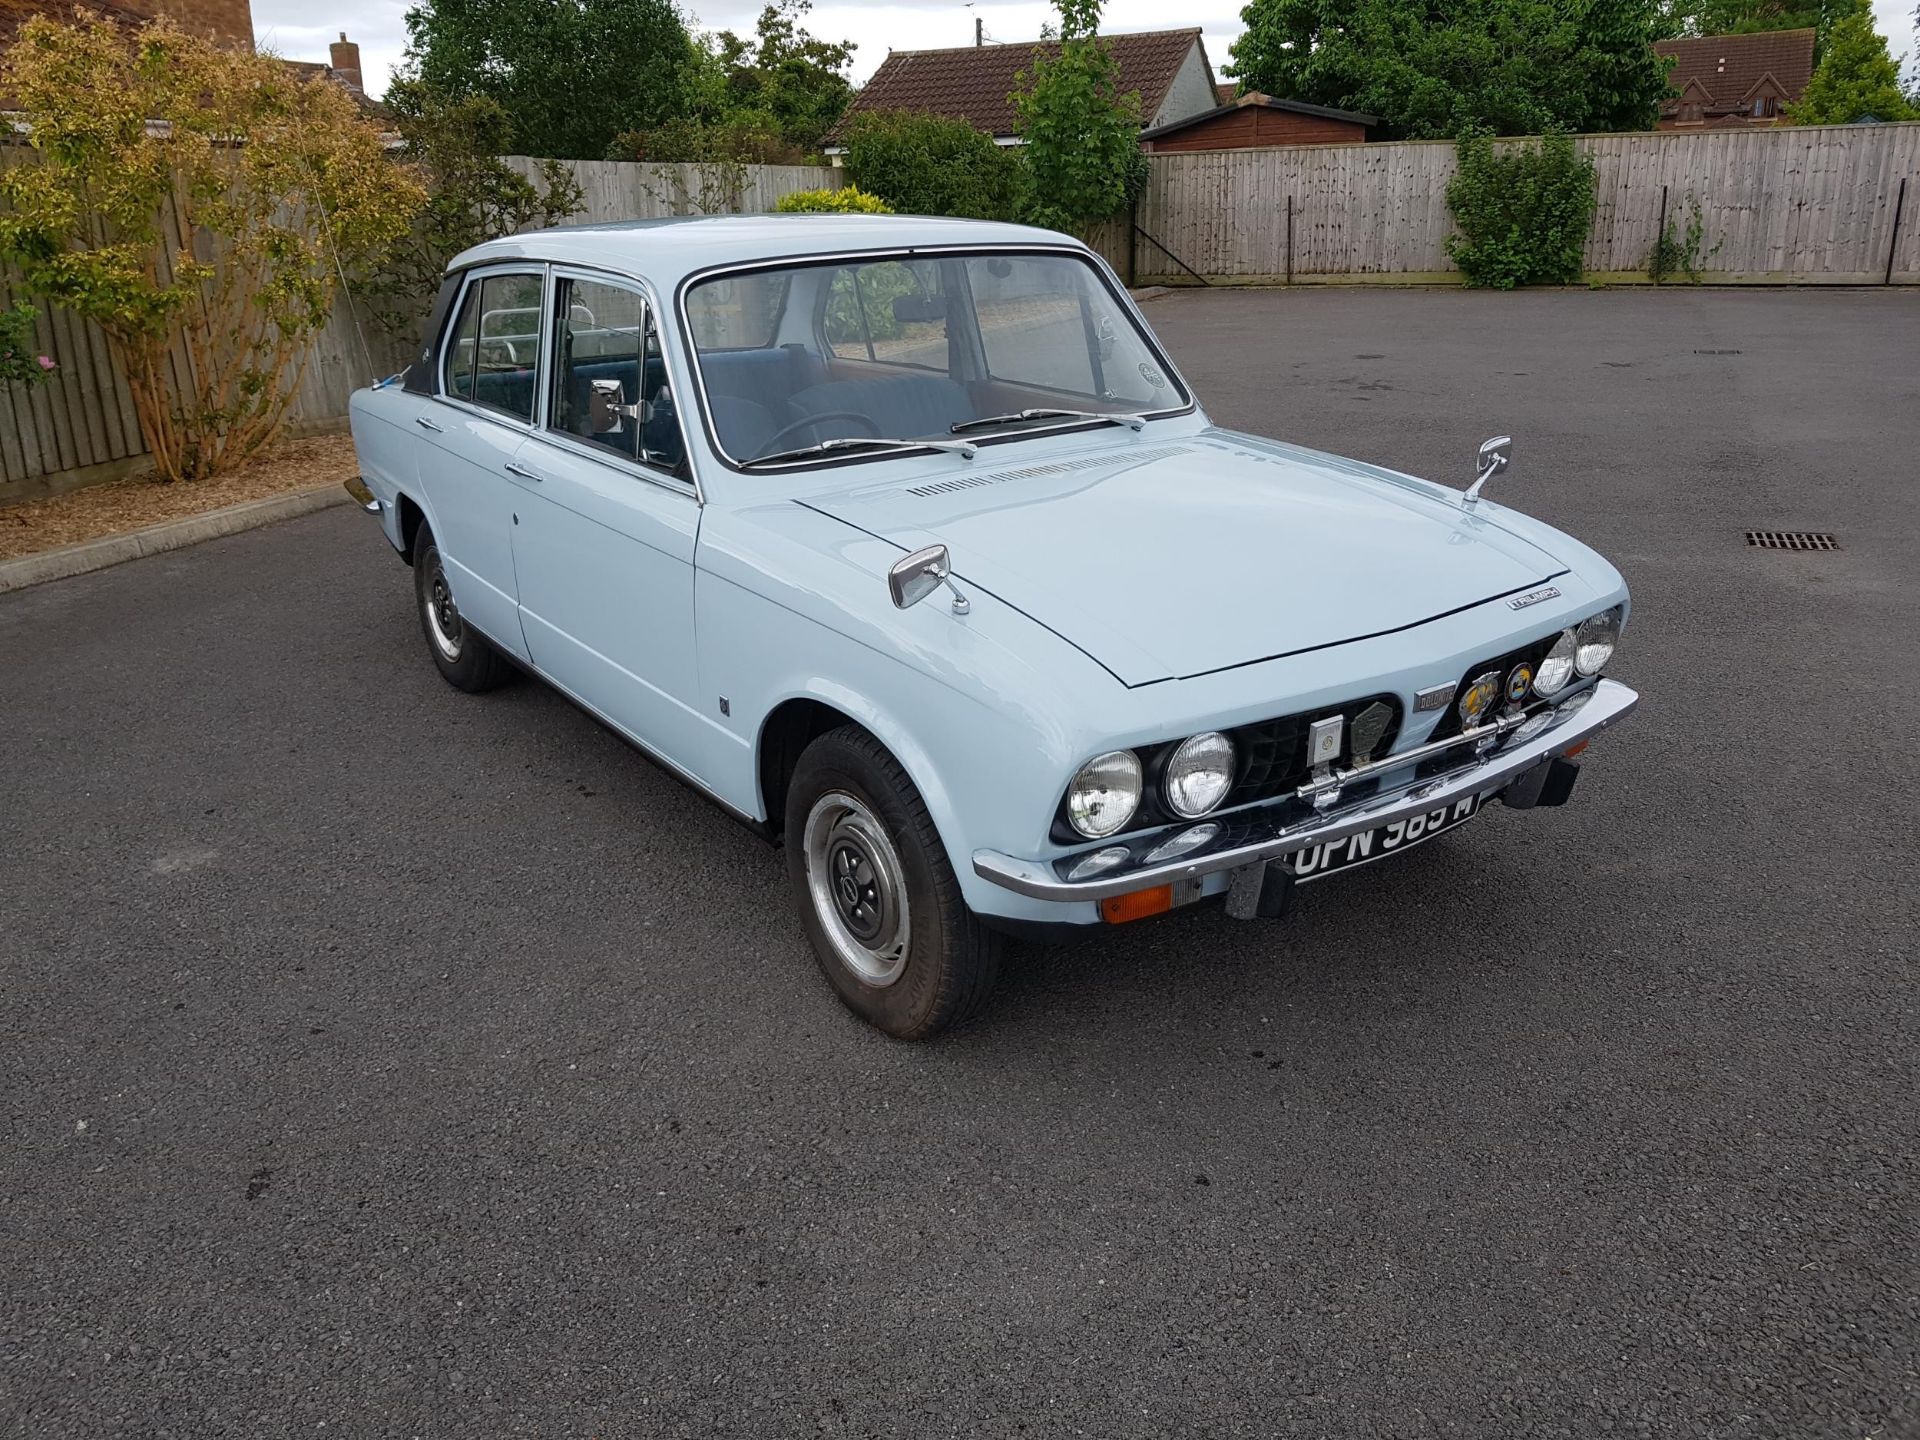 1974 Triumph Dolomite 1850 Registration number OPN 985M Light French blue with blue cloth interior - Image 2 of 14